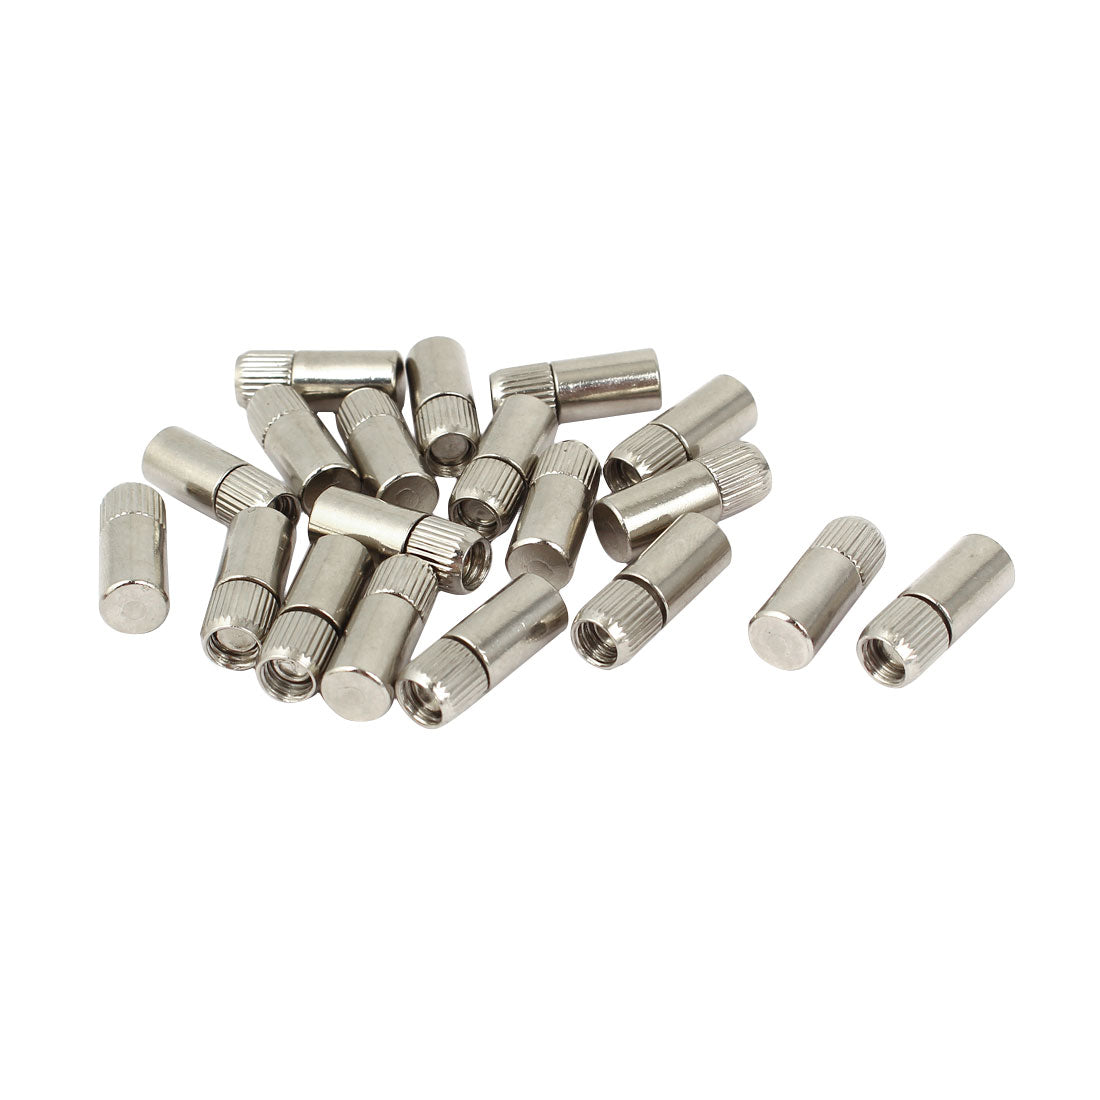 uxcell Uxcell 21mm x 8mm Metal Cylindrical Rod Studs Pegs Shelf Support Pins Silver Tone 20PCS